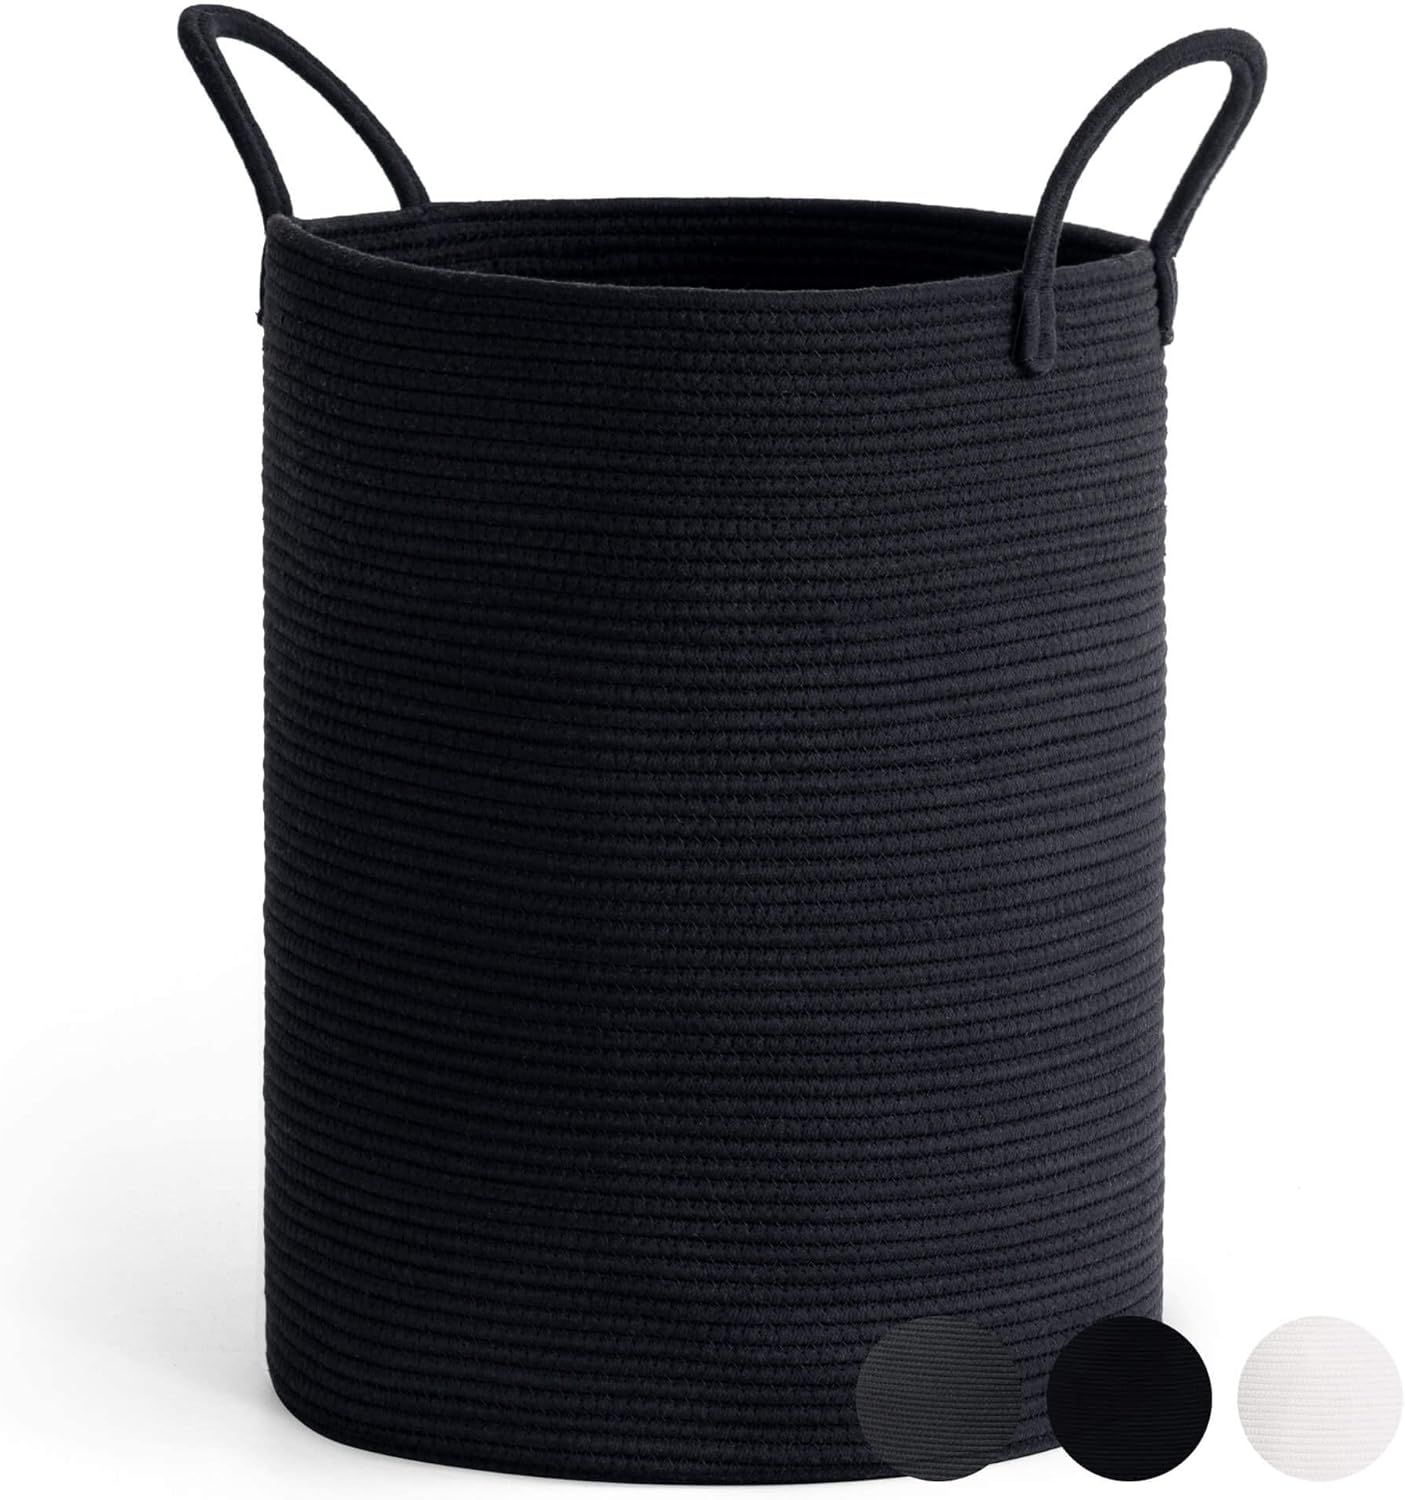 Goodpick Black Woven Rope Laundry Basket, Tall Modern Laundry Hamper for Clothes, Blankets, Toys,... | Amazon (US)